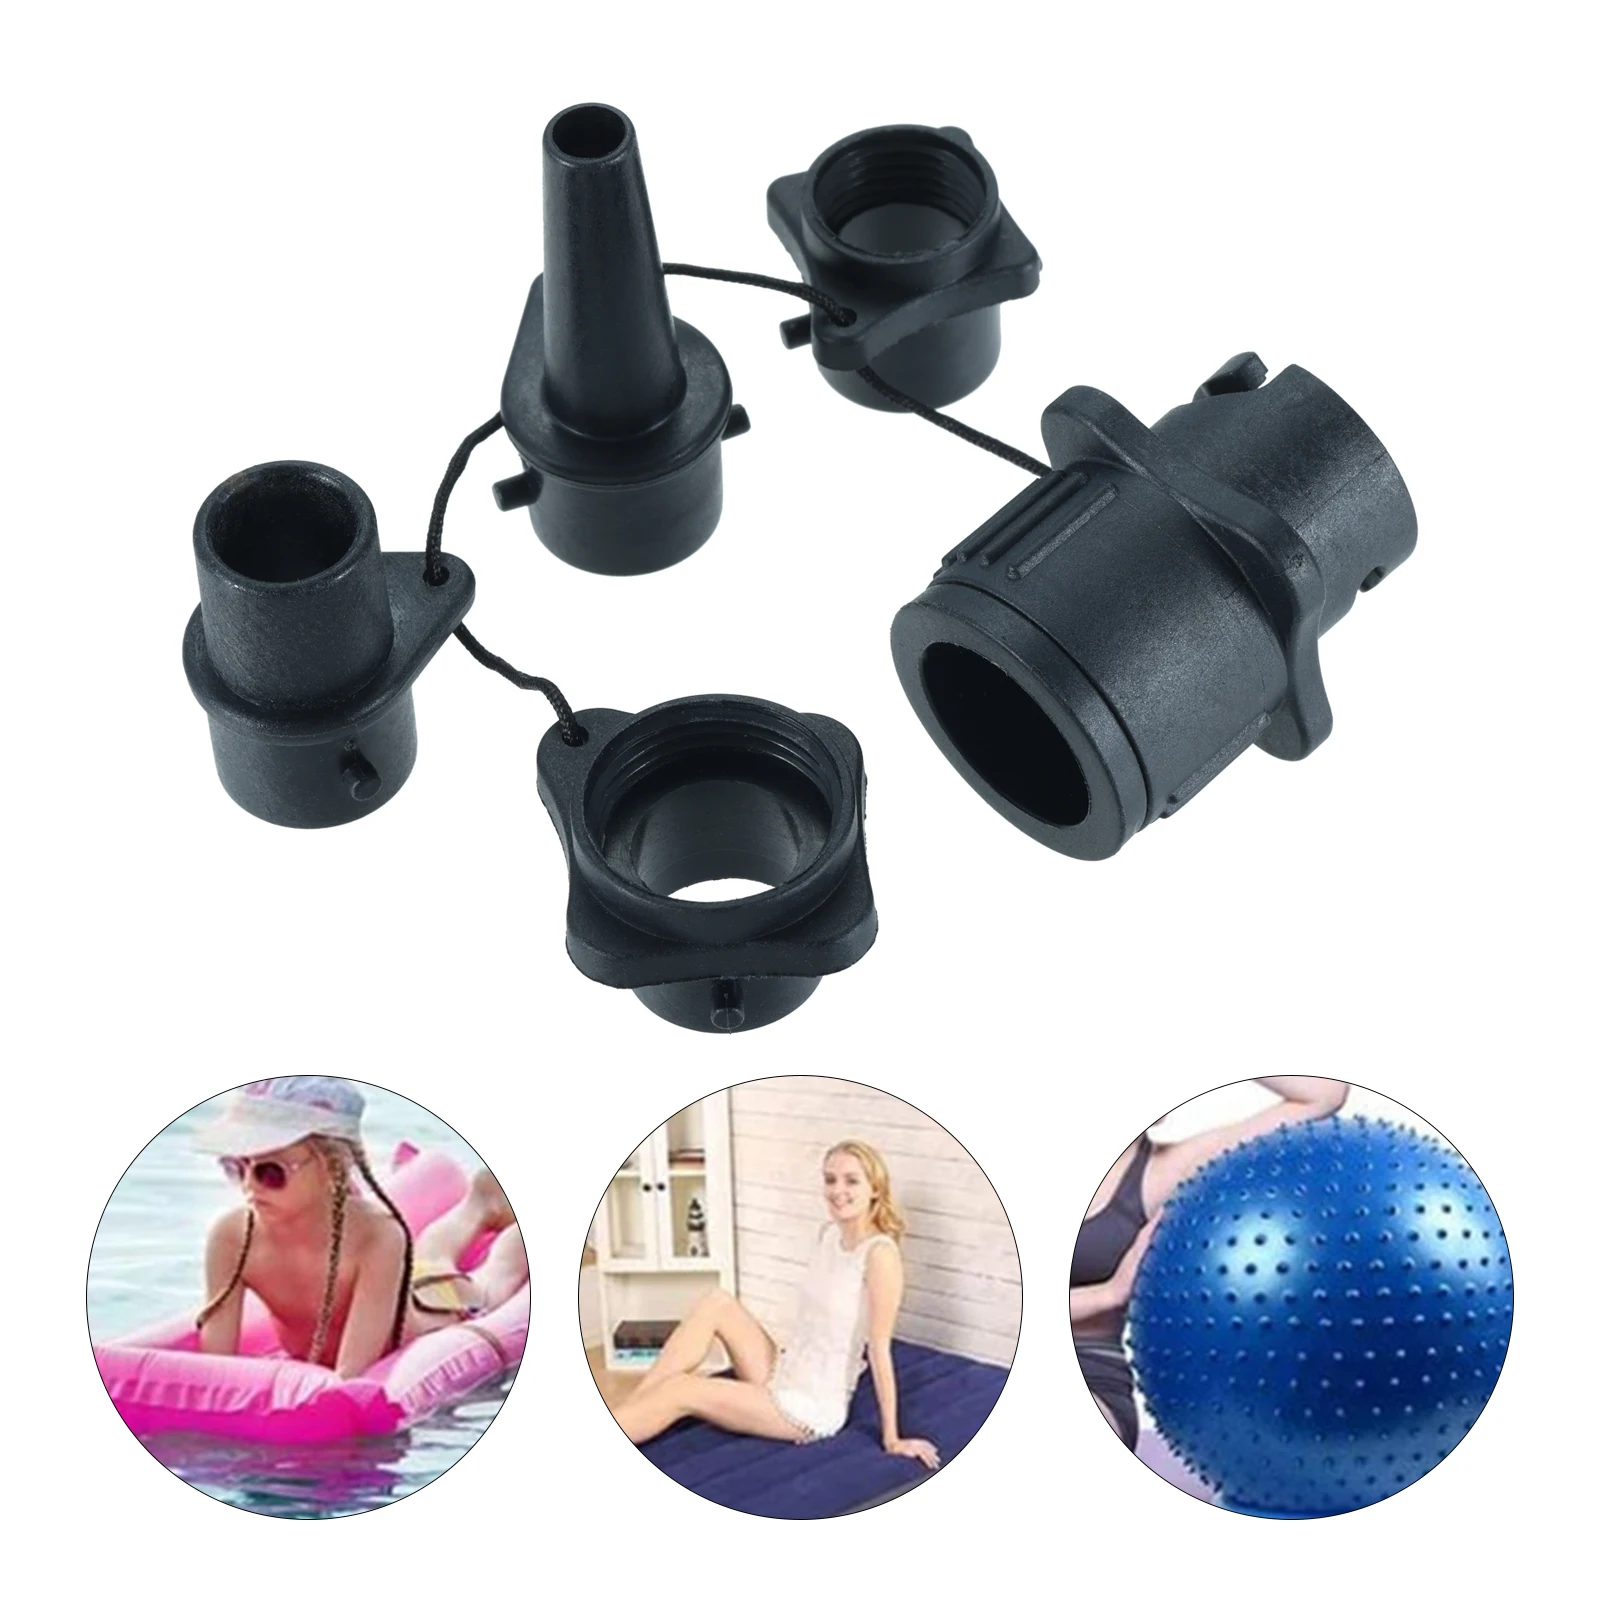 1 Set Air Valve Nozzle Adapter Kit Black Plastic Multi-Function Hose Connector Surf Paddle Board Canoe Inflatable Boat Accessory nbsanminse 10pcs lot pdj branch tee push in air plastic fitting pneumatic hose connector for air vacuum pu tube